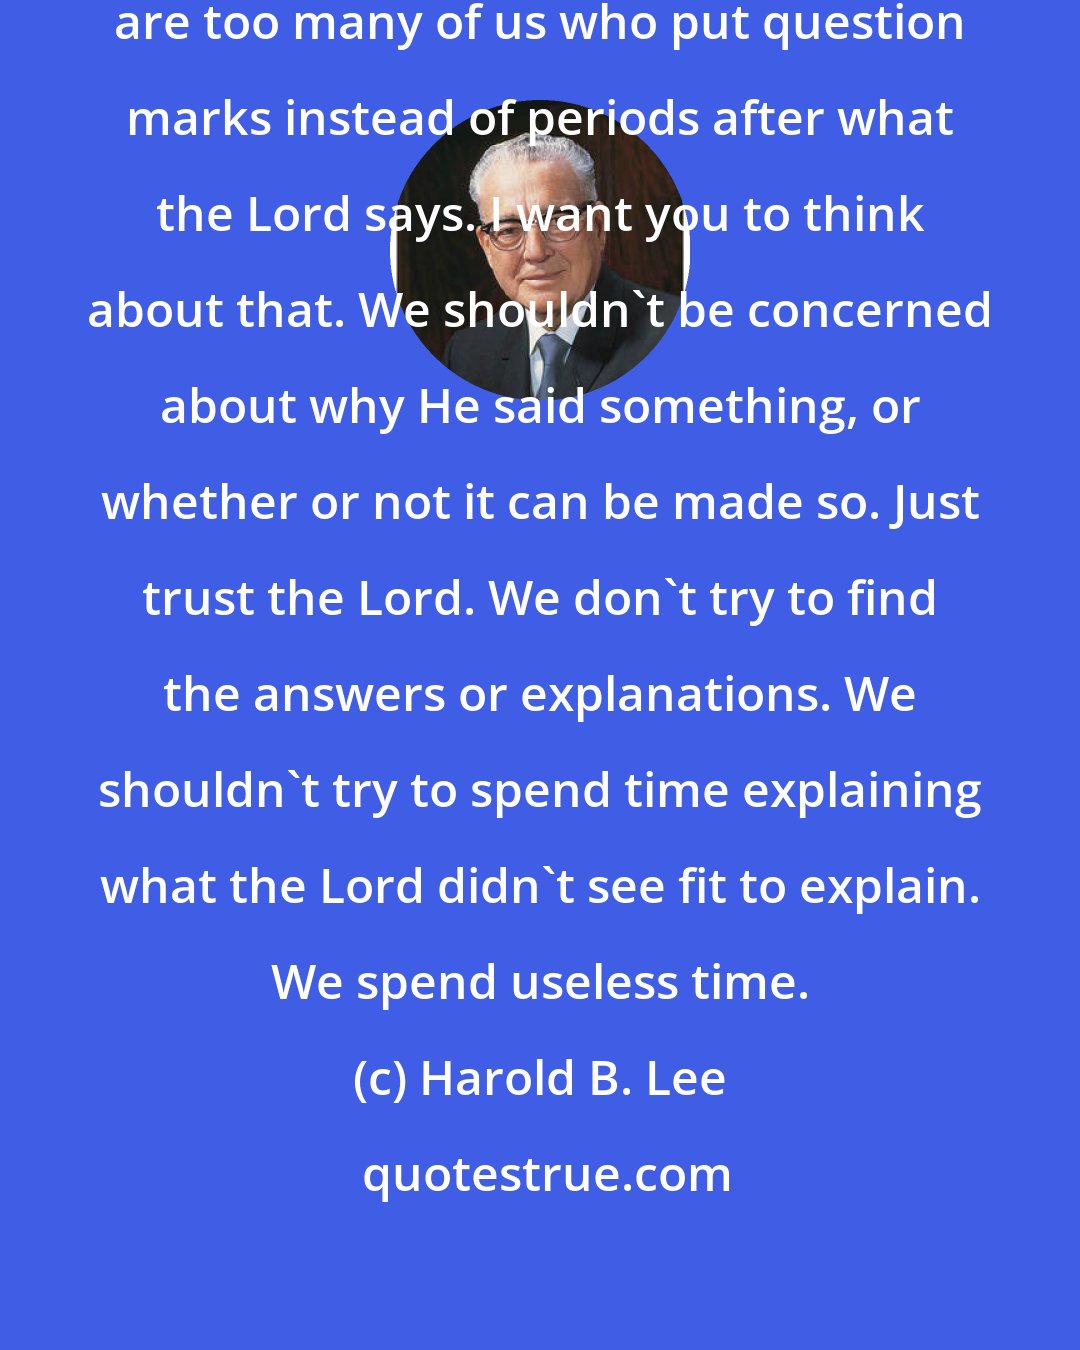 Harold B. Lee: The trouble with us today, there are too many of us who put question marks instead of periods after what the Lord says. I want you to think about that. We shouldn't be concerned about why He said something, or whether or not it can be made so. Just trust the Lord. We don't try to find the answers or explanations. We shouldn't try to spend time explaining what the Lord didn't see fit to explain. We spend useless time.